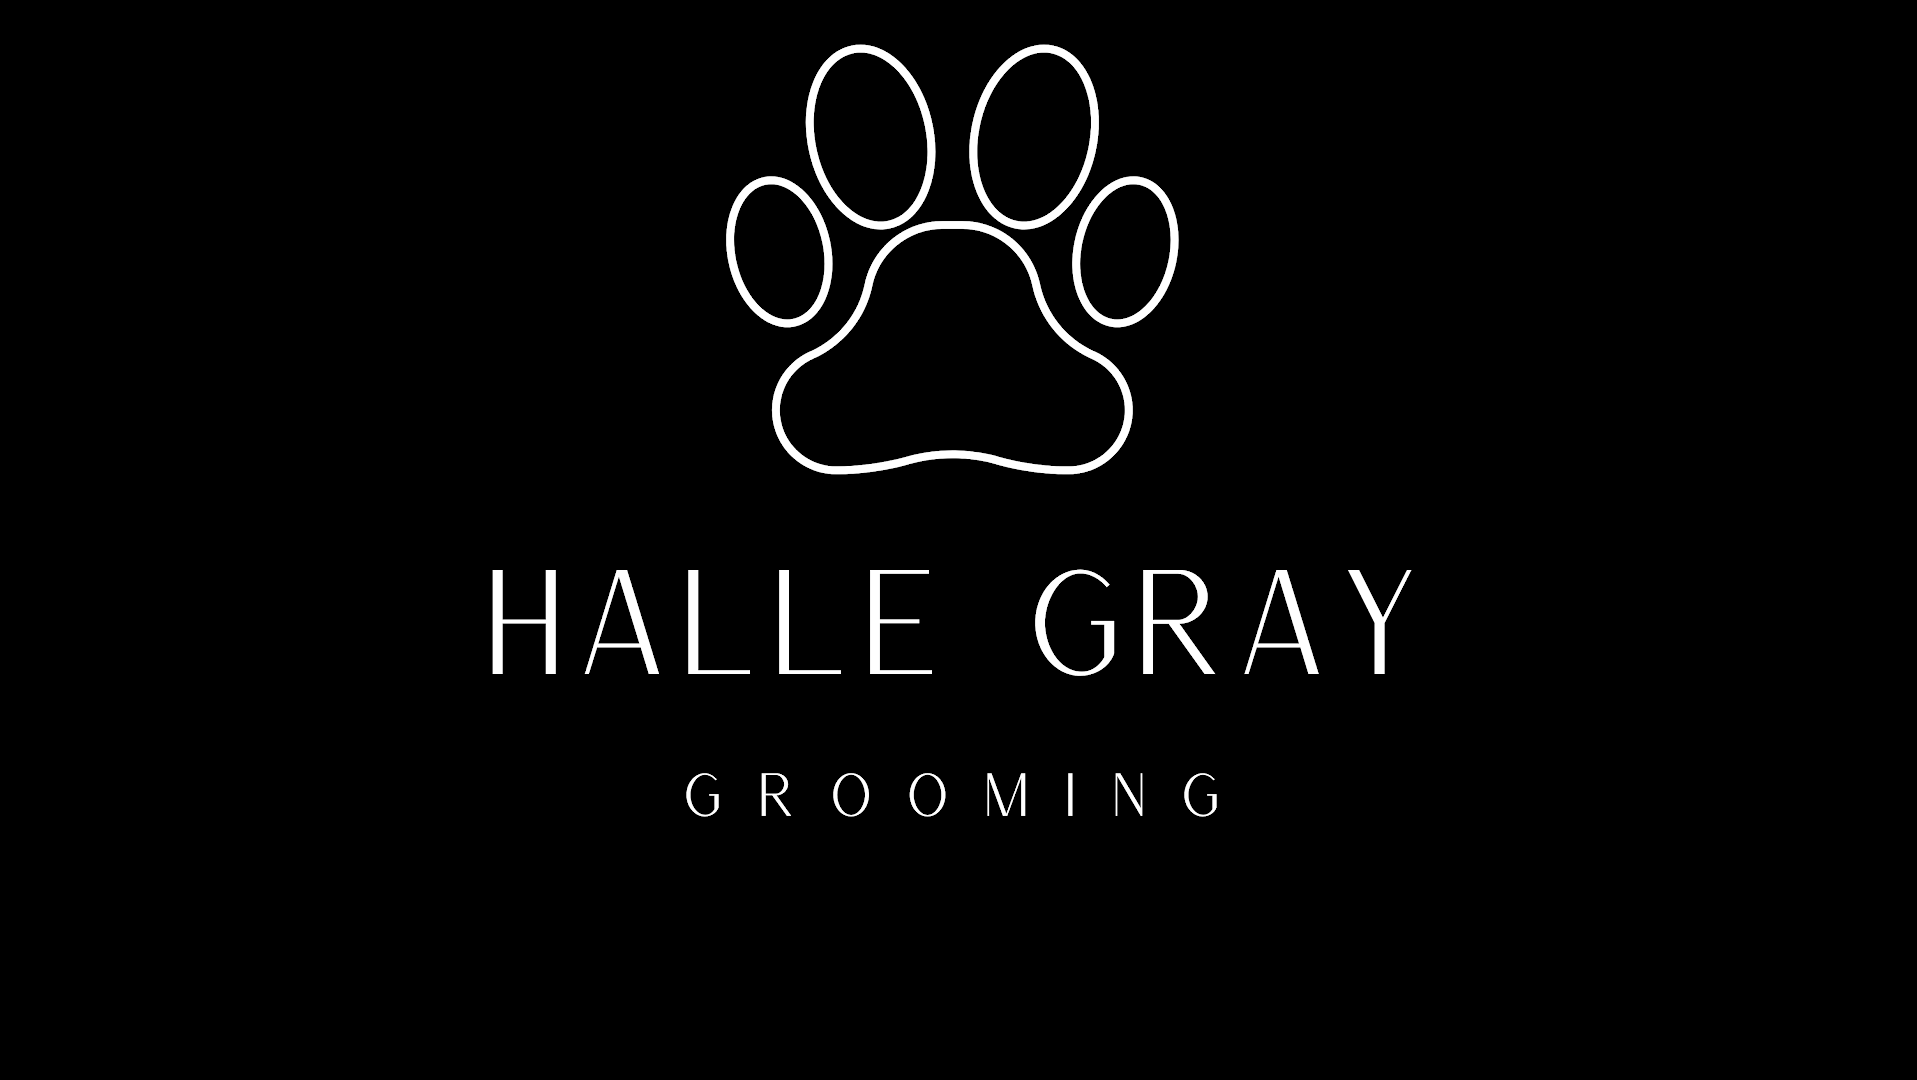 Halle Gray Grooming